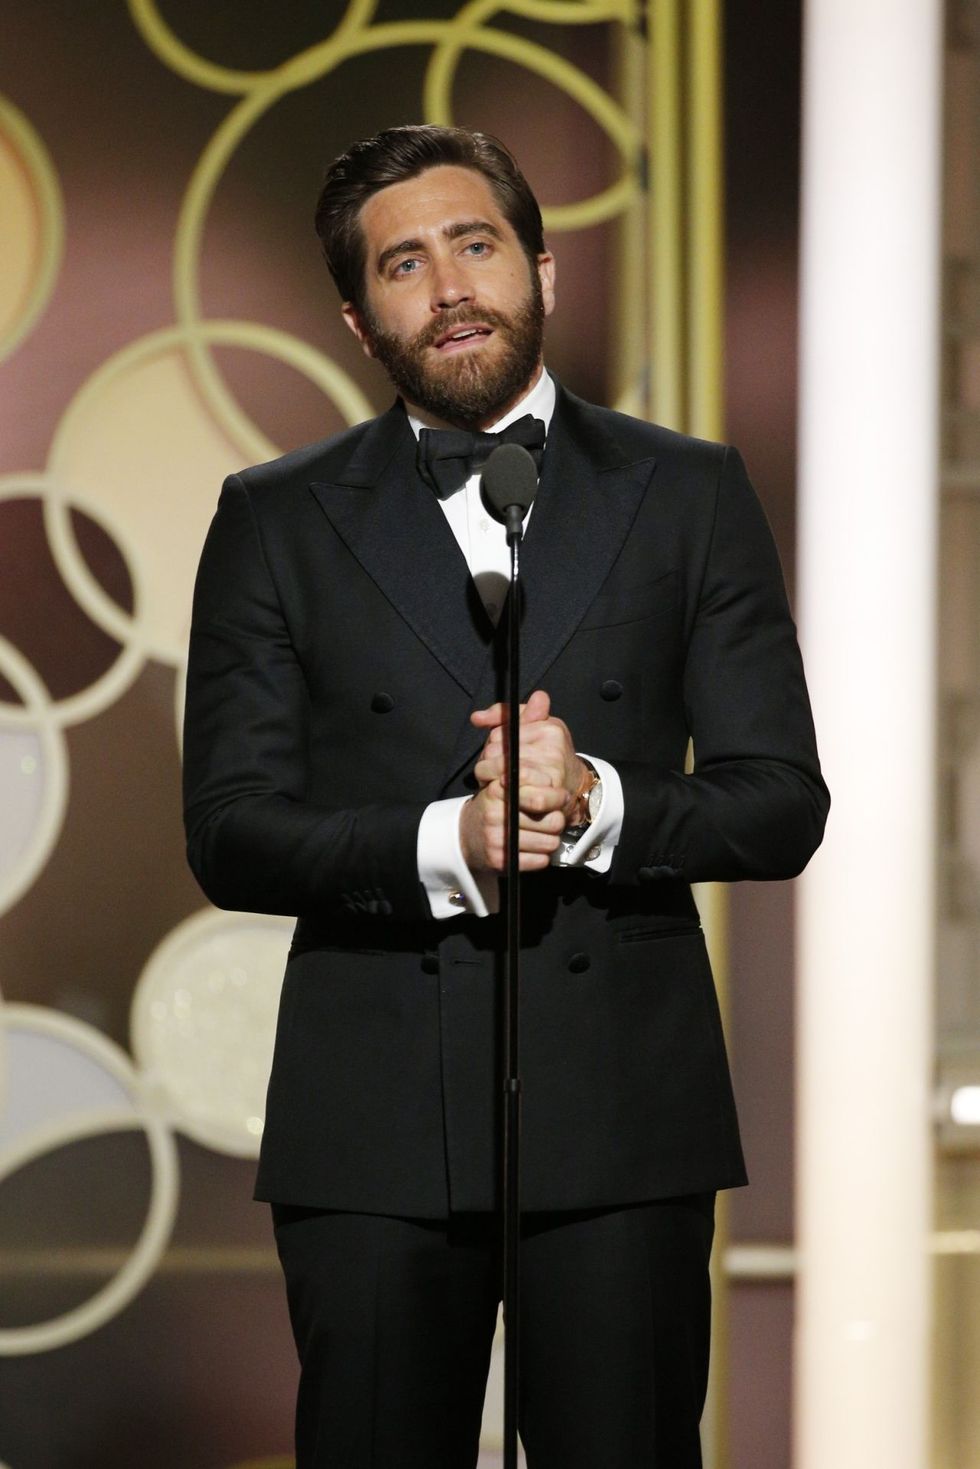 BEVERLY HILLS, CA - JANUARY 08: In this handout photo provided by NBCUniversal, presenter Jake Gyllenhaall onstage during the 74th Annual Golden Globe Awards at The Beverly Hilton Hotel on January 8, 2017 in Beverly Hills, California. (Photo by Paul Drinkwater/NBCUniversal via Getty Images)